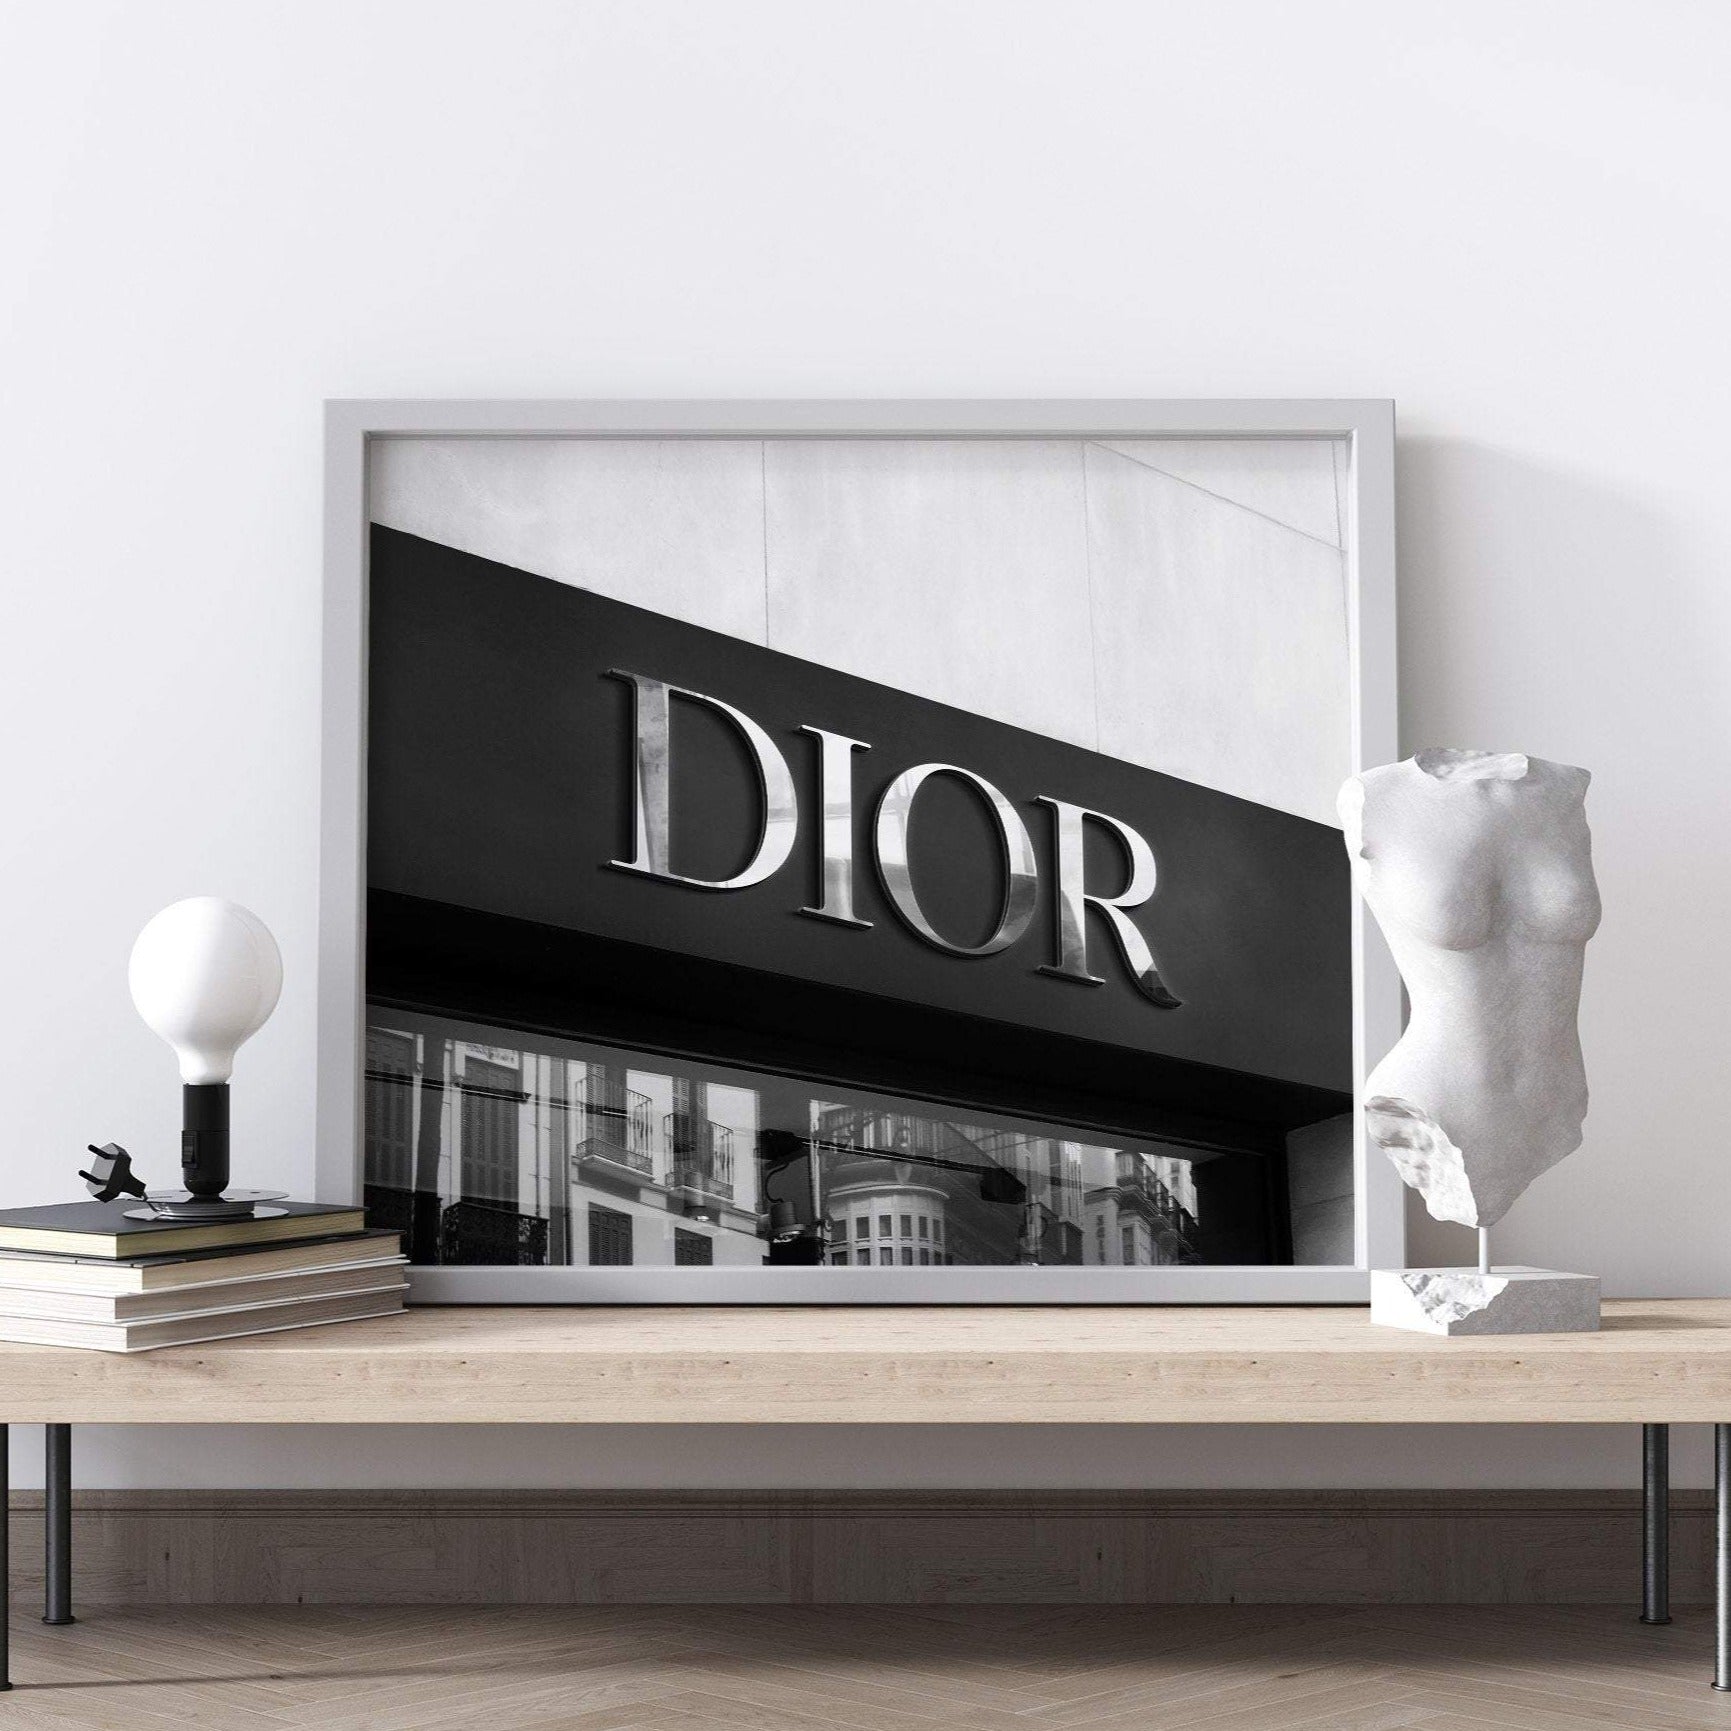 The New Look, Christian Dior, 1 - Canvas Wall Art